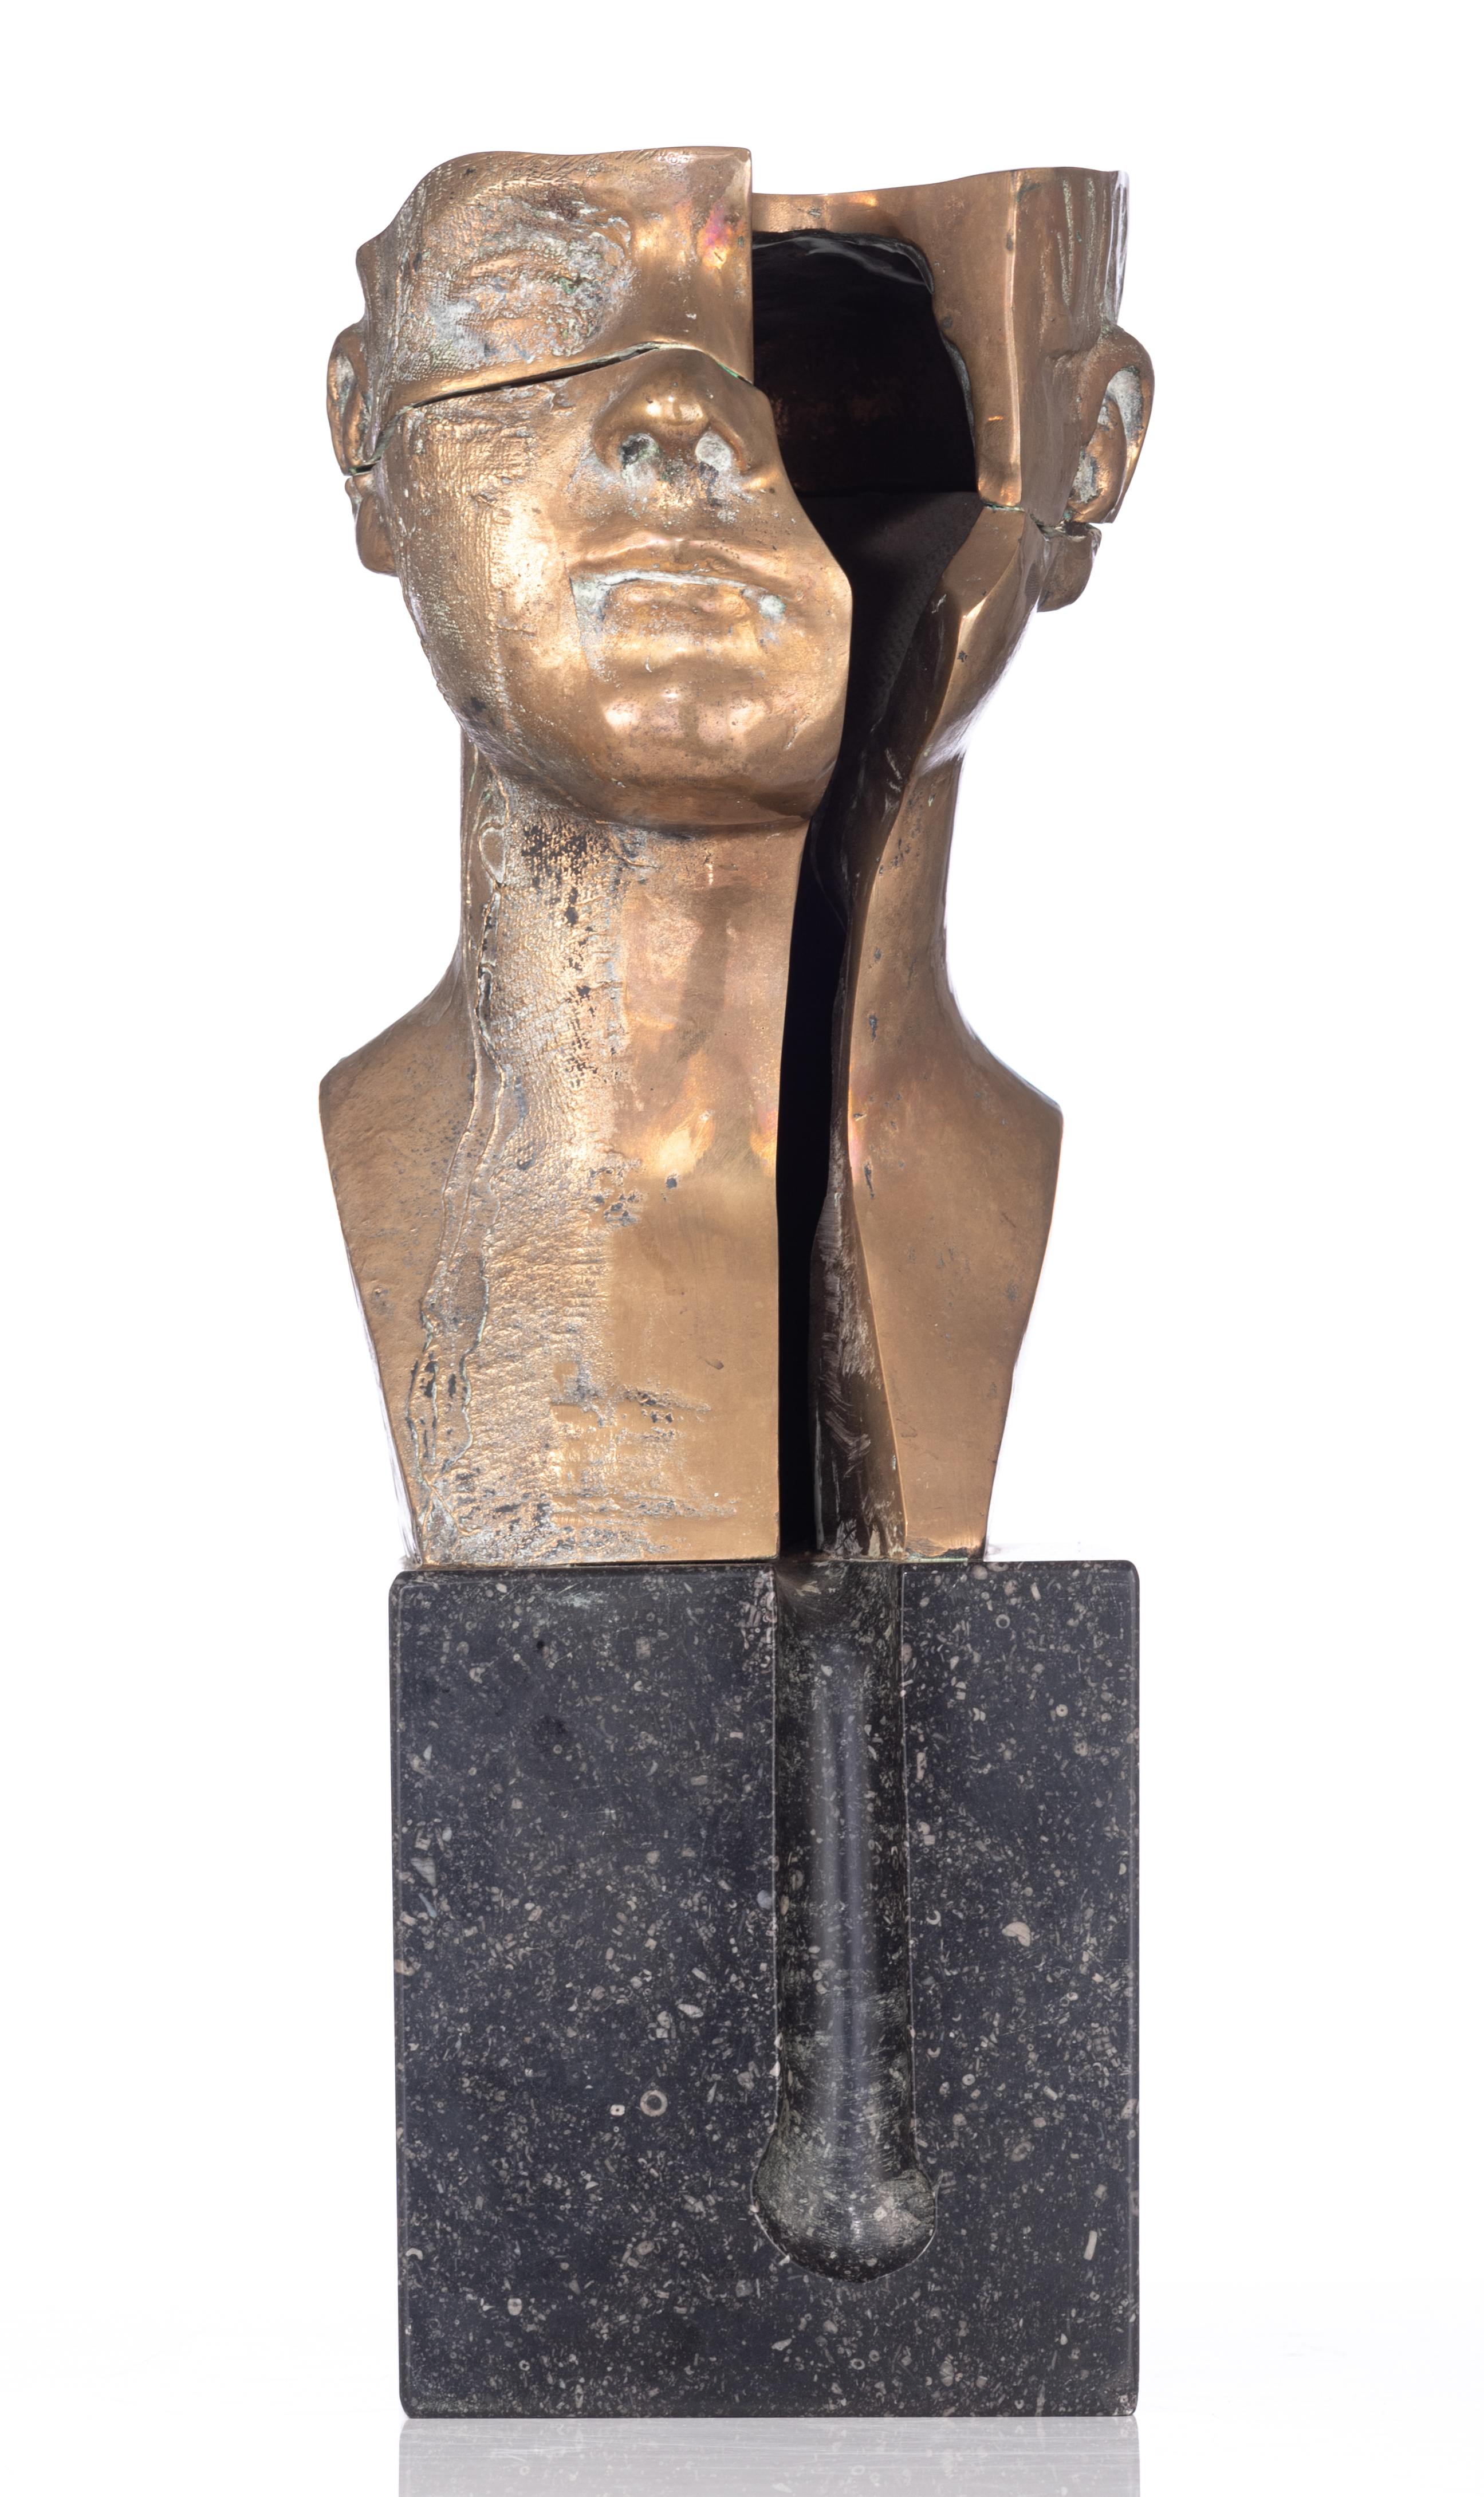 Claerhout J., untitled, patinated bronze, H 42 - W 46 cm. Added: Verjans R., untitled, dated 1975, N - Image 2 of 12